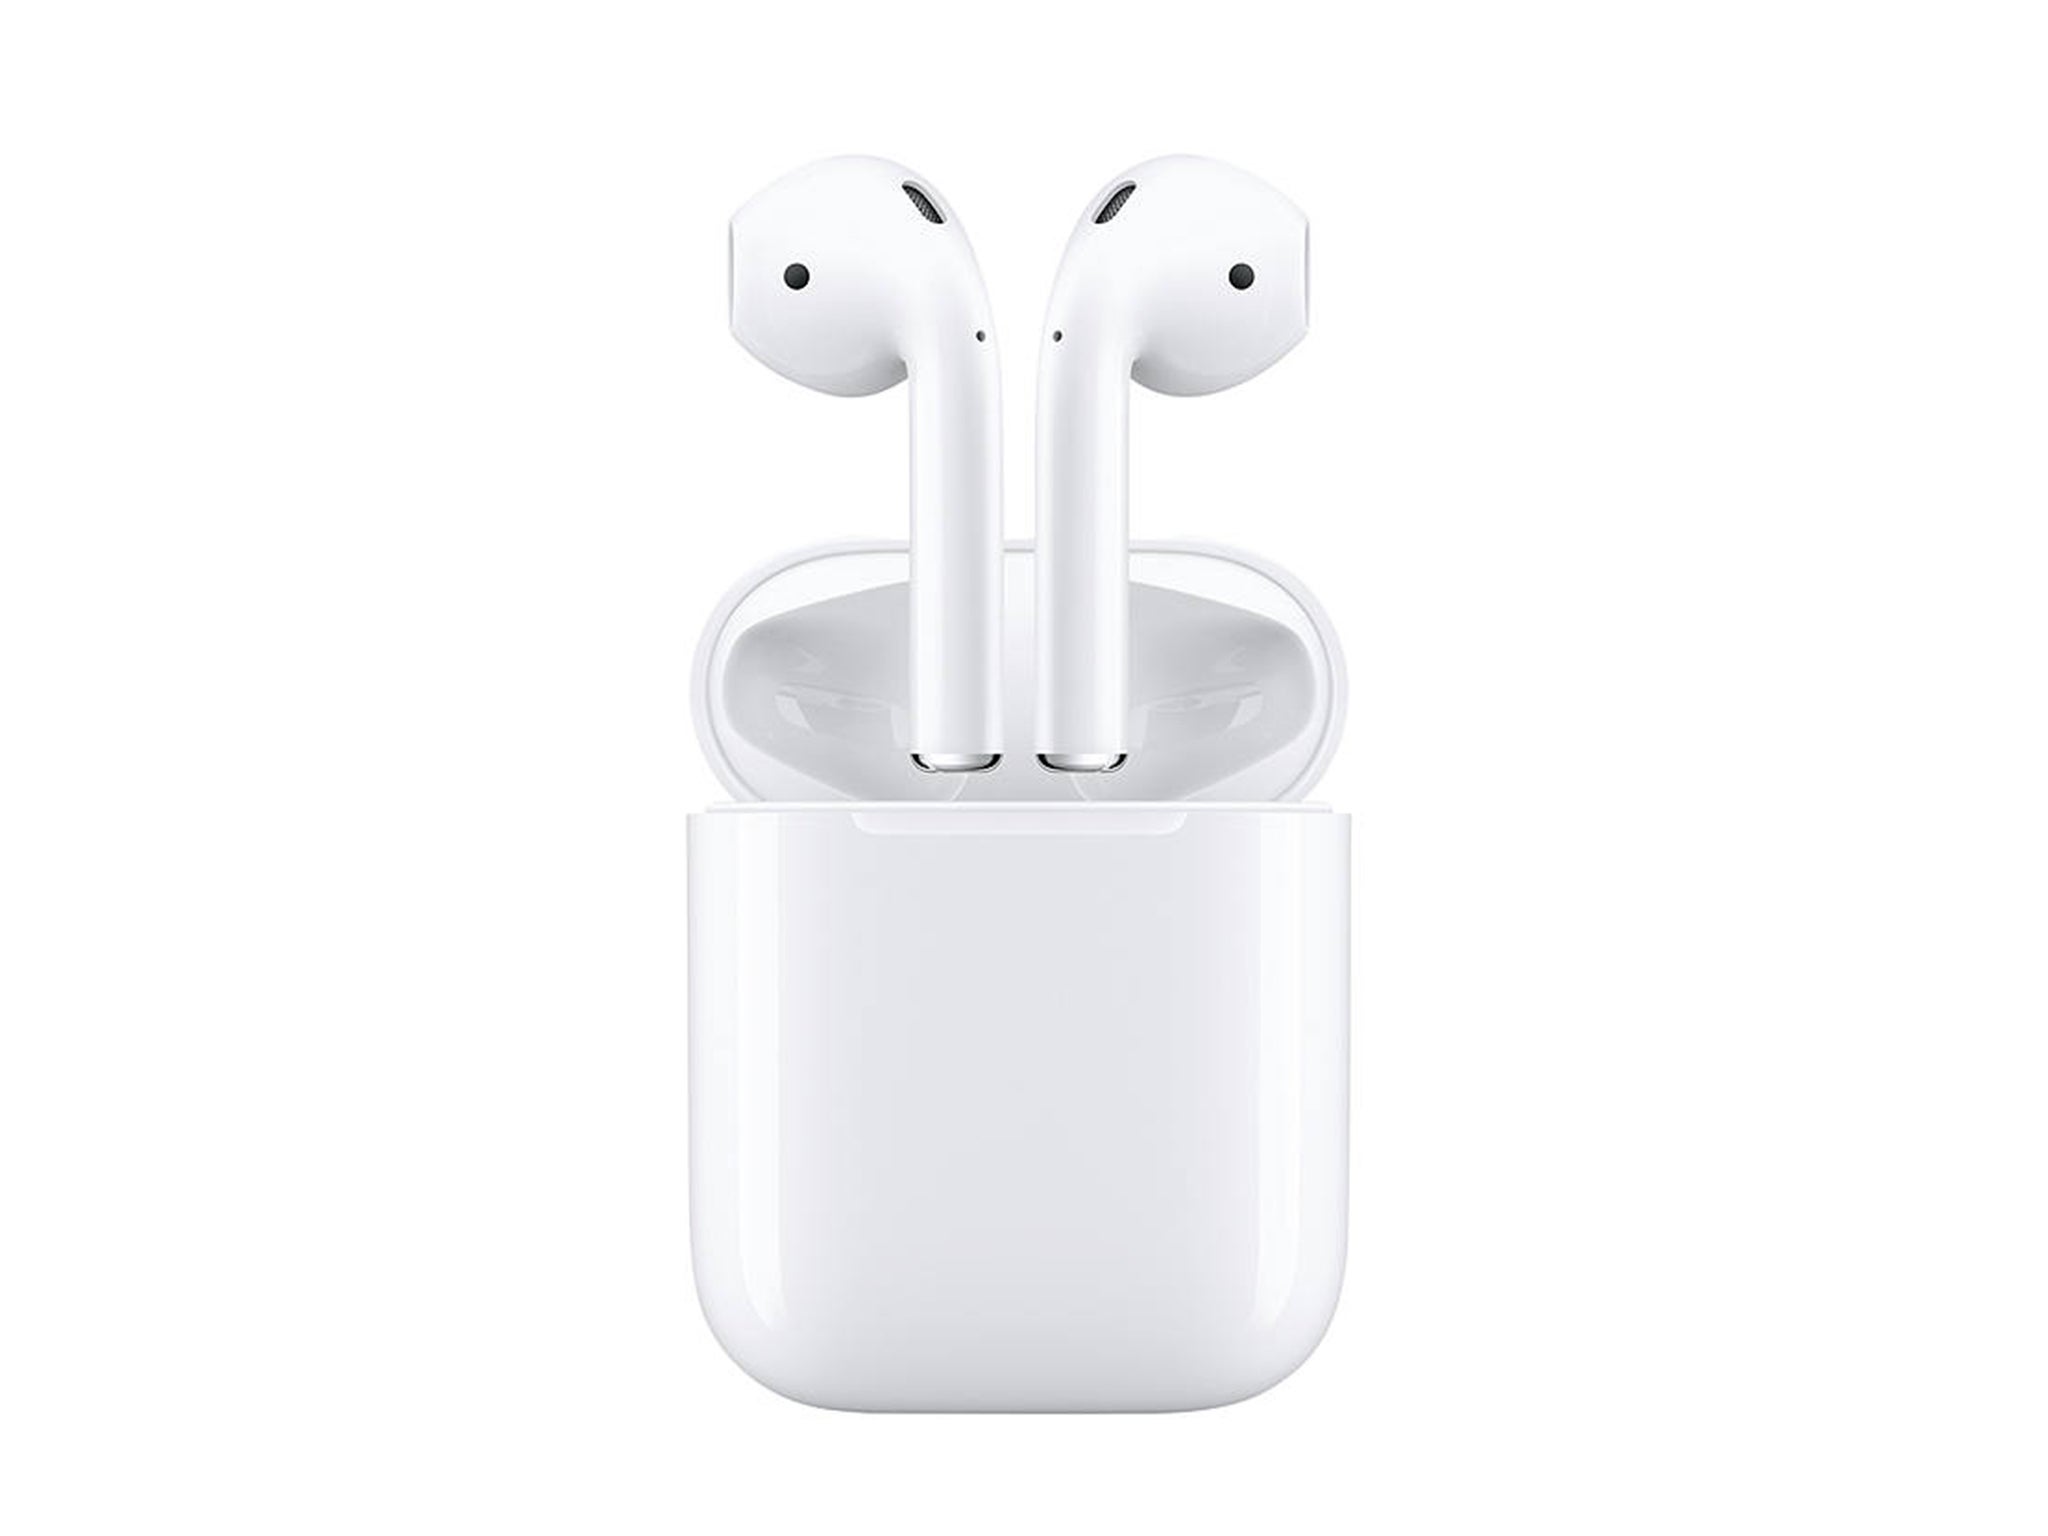 Tws airpod 2. Наушники беспроводные Hoco ew02. Наушники беспроводные Apple AIRPODS 2. Наушники TWS Apple AIRPODS 2 белый. Наушники Apple AIRPODS 2 with Charging Case.